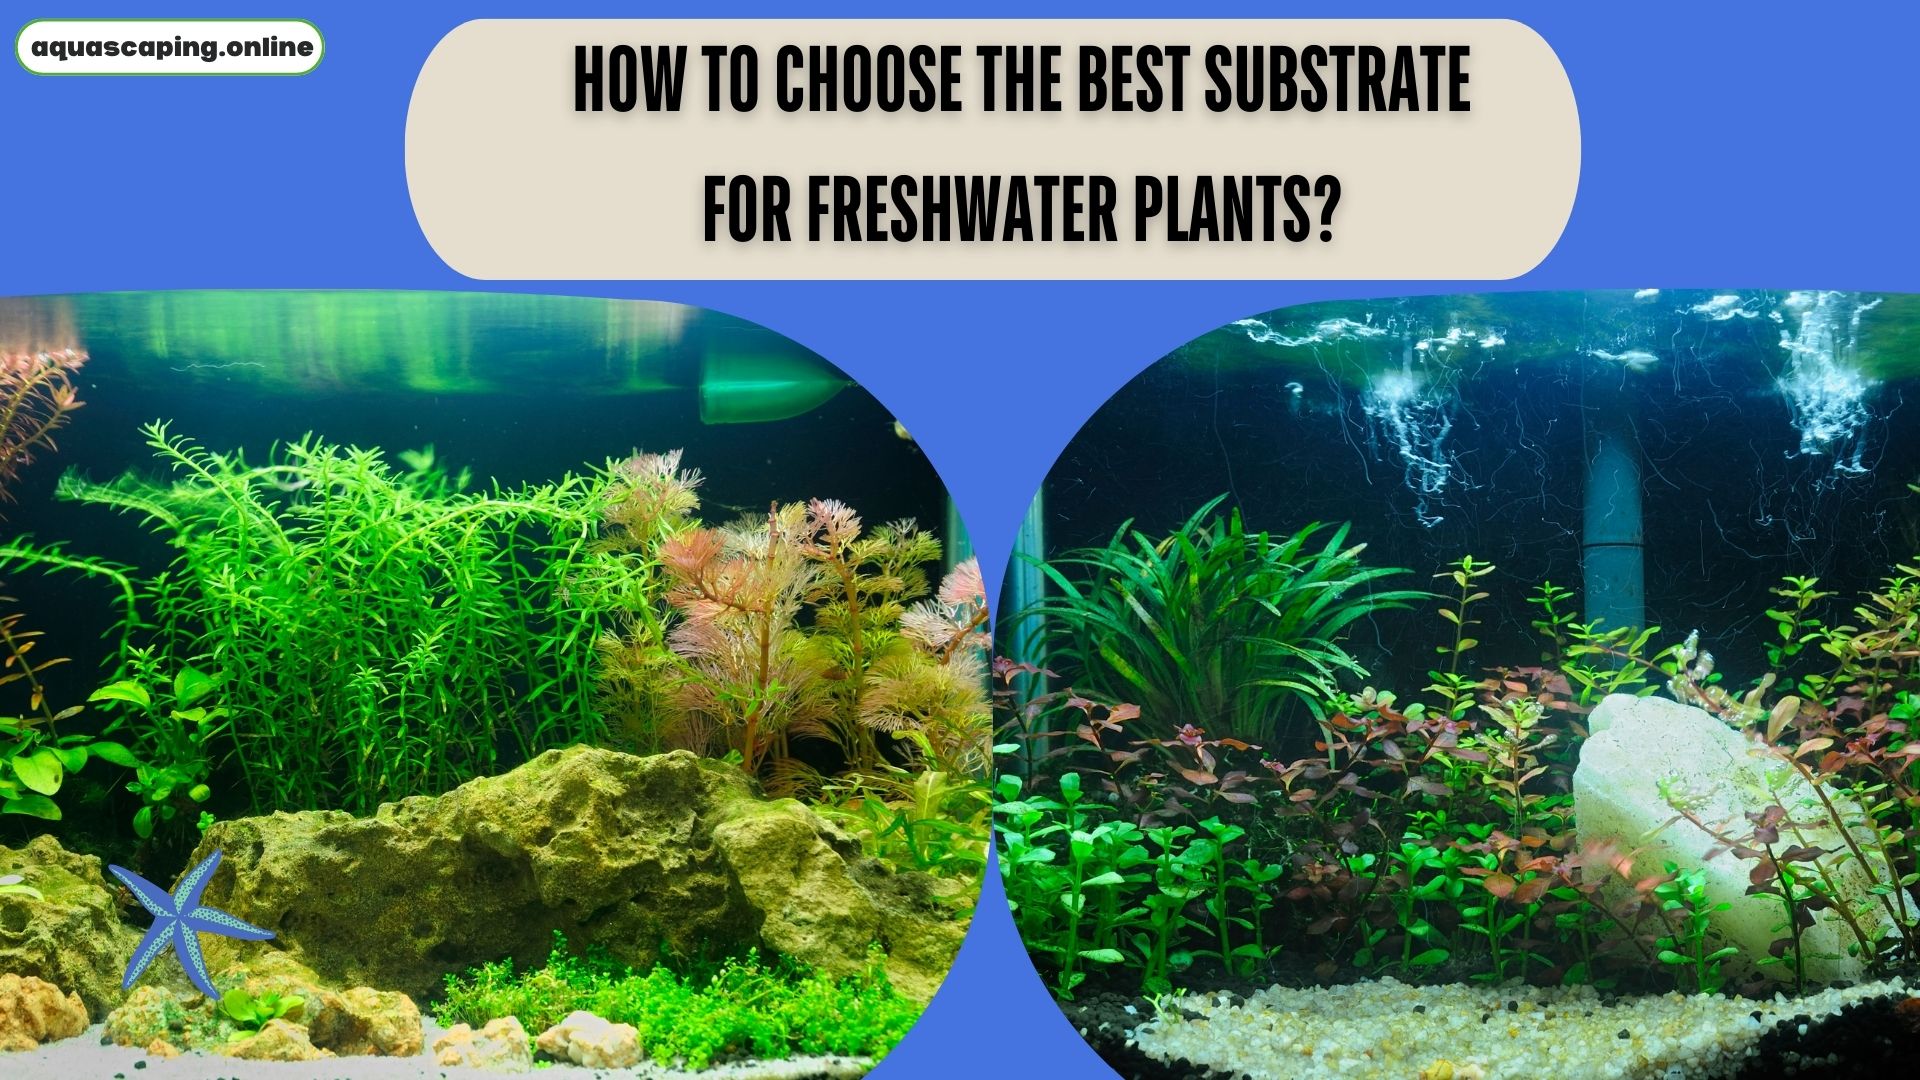 The best substrate for freshwater plants